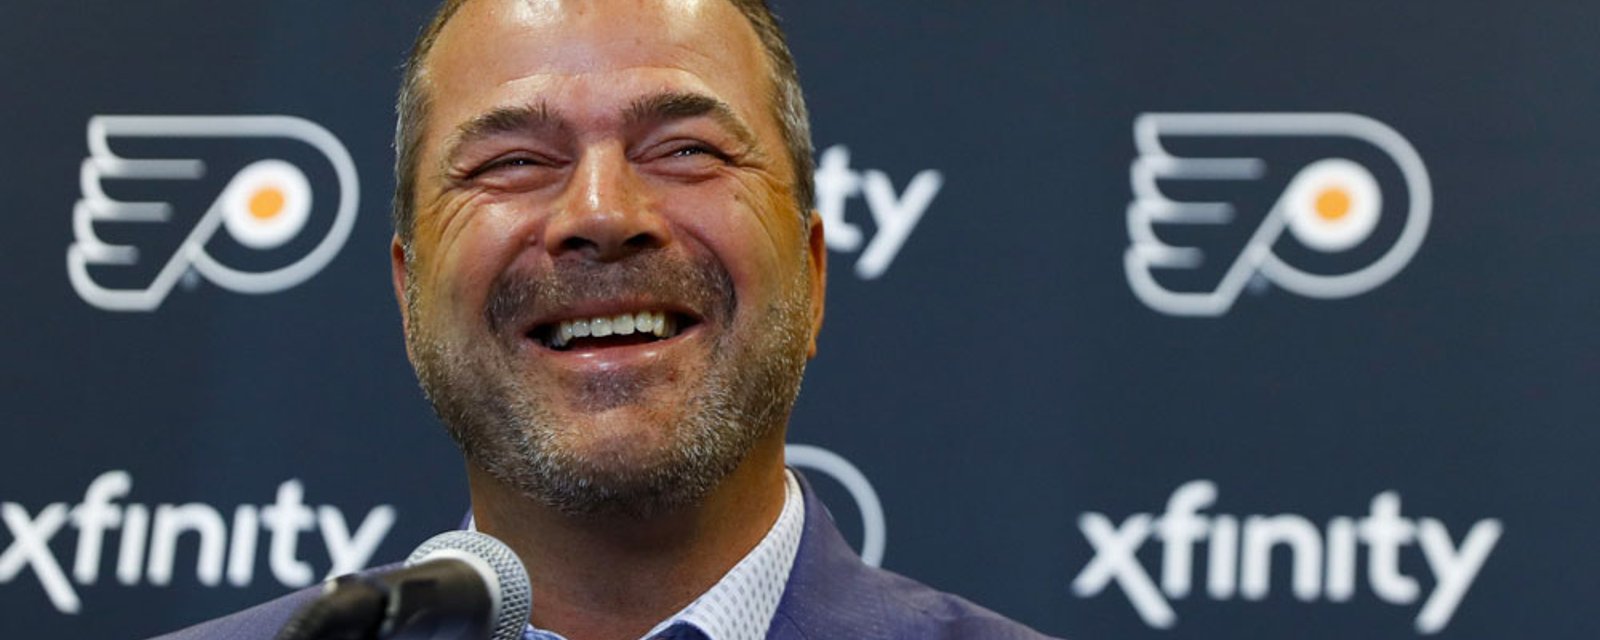 Vigneault’s off week plan: Sipping martinis and ignoring emails 